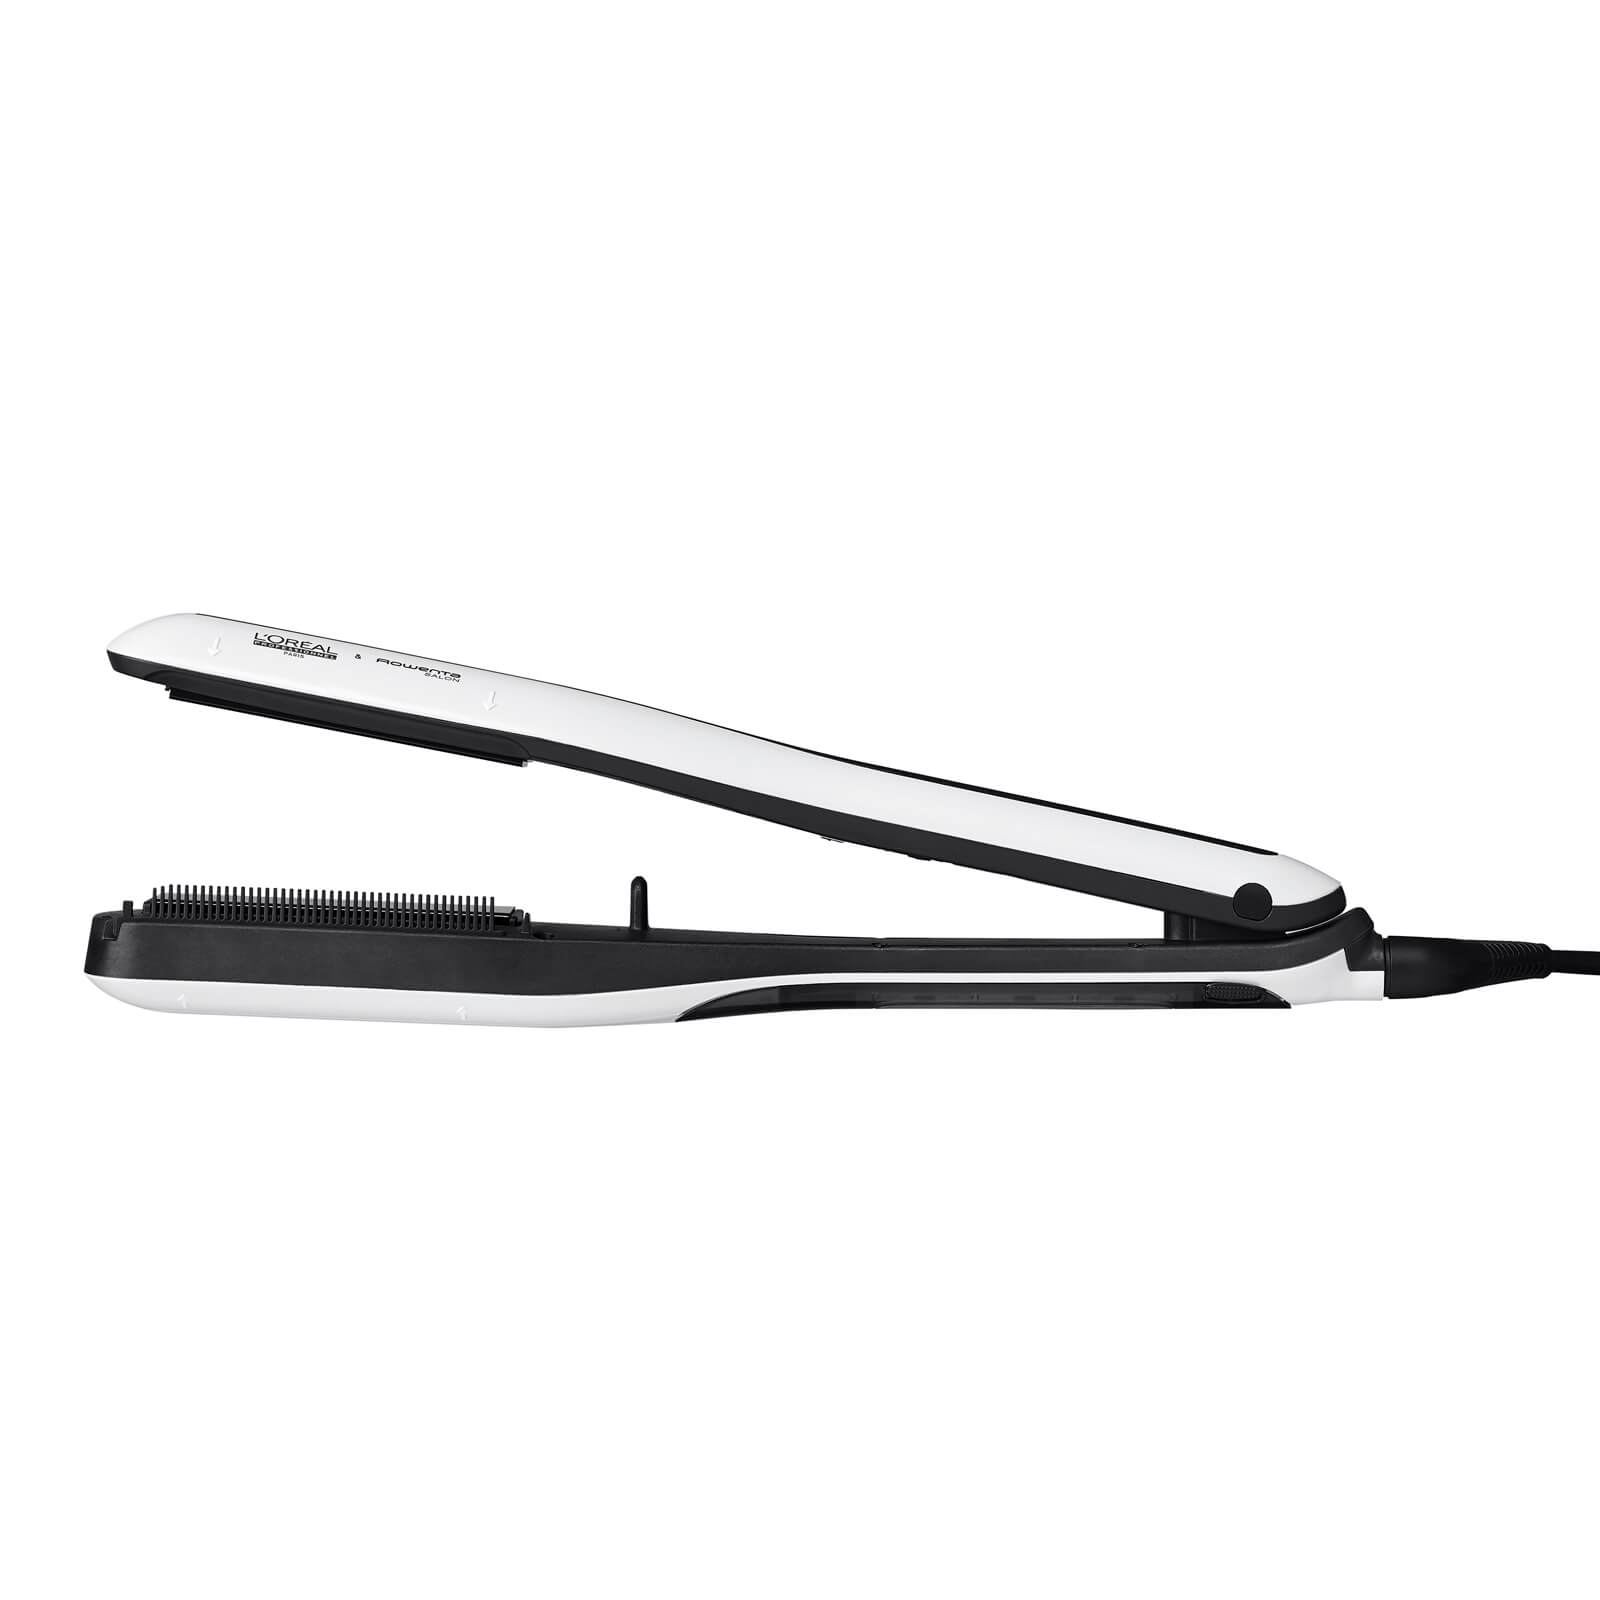 L'Oréal Professionnel Steampod Steam Straightening Tool 3.0